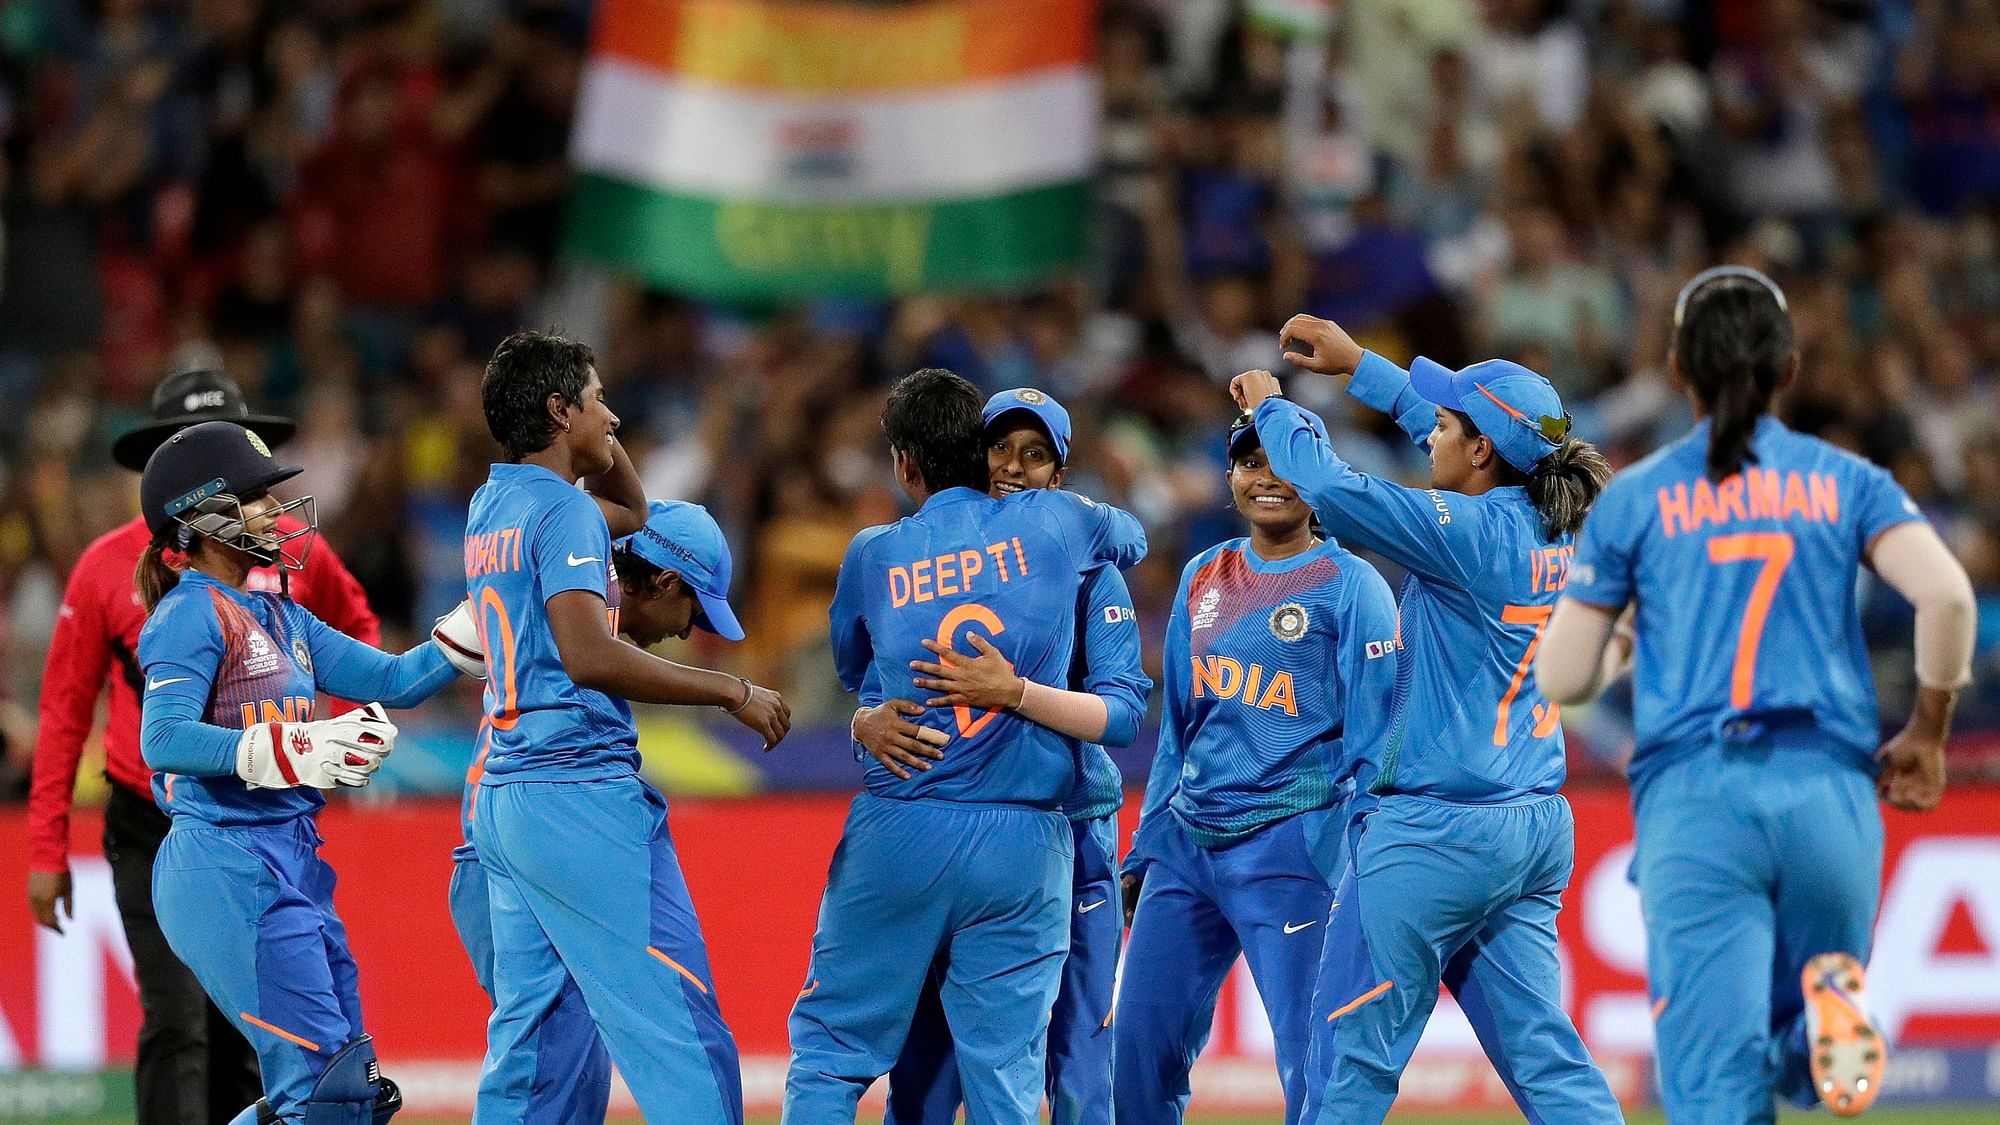 India have hardly broke a sweat in their 17-run and 18-run wins over hosts Australia and Bangladesh in their previous two matches.